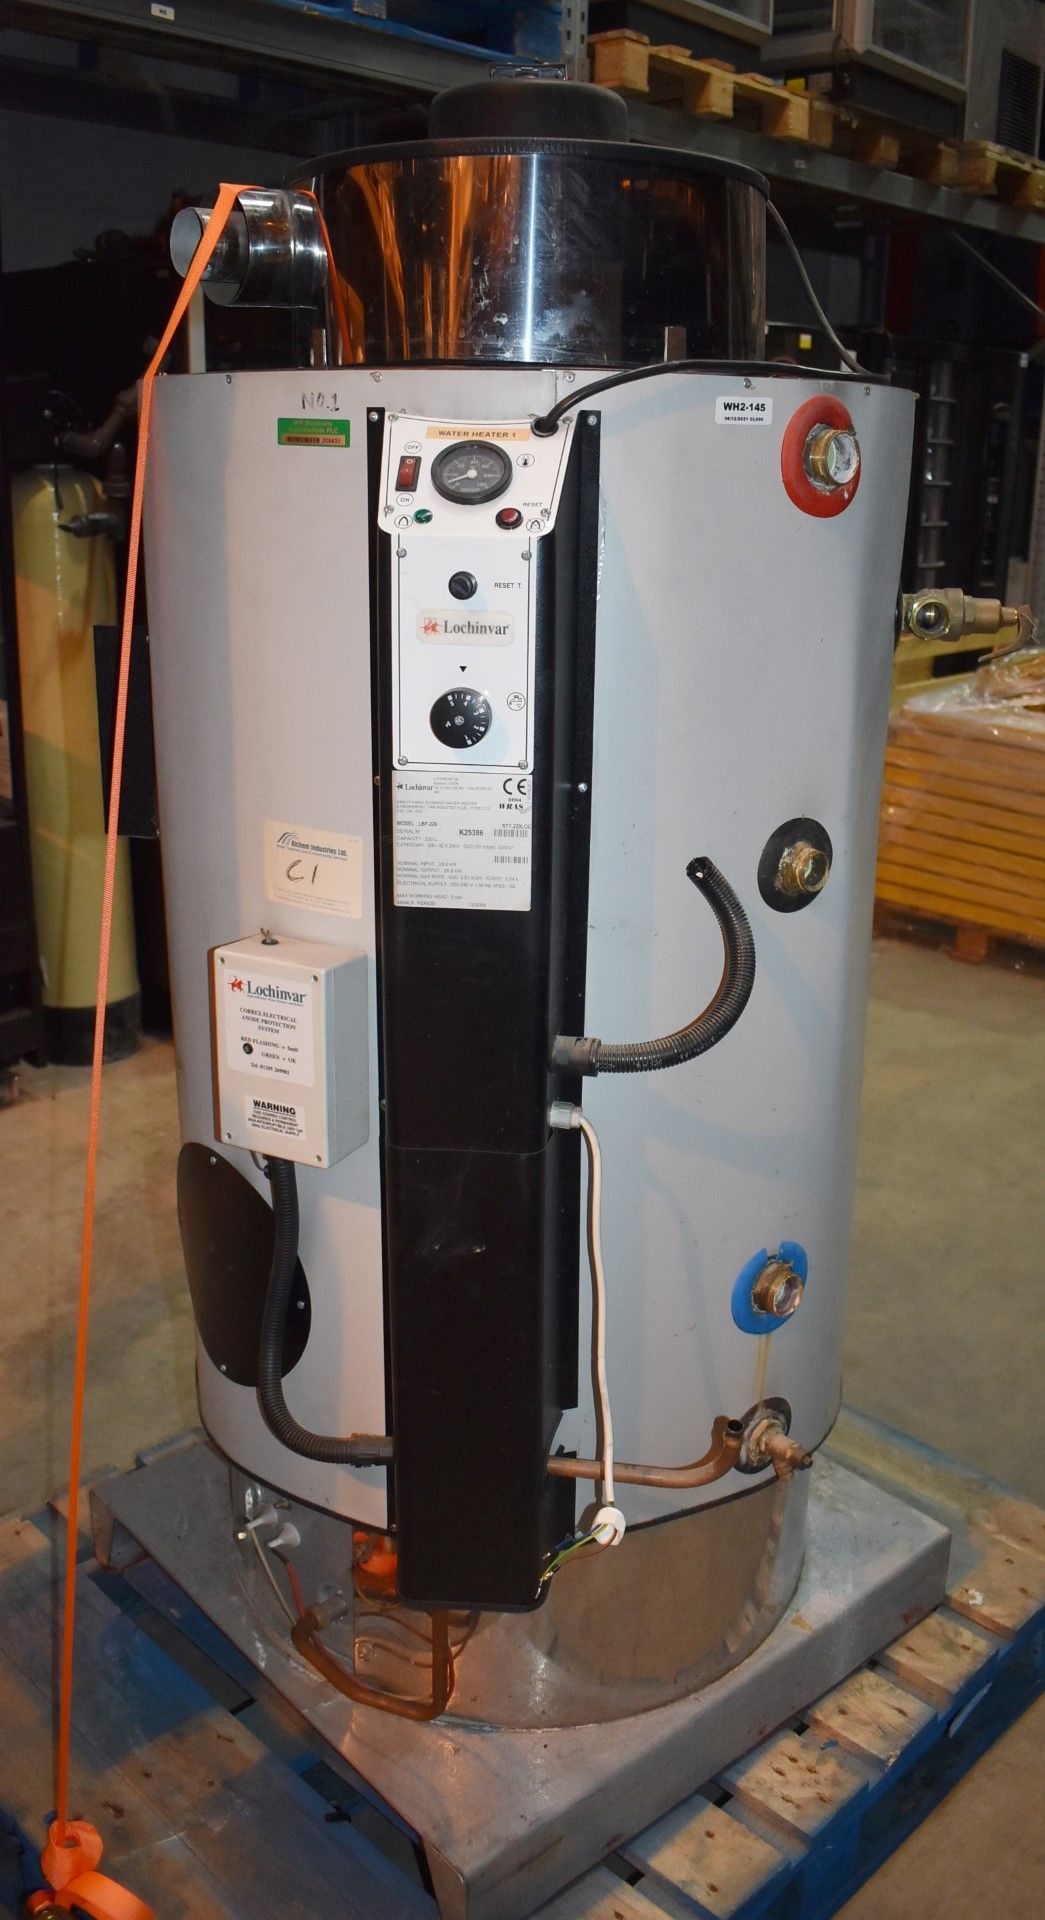 1 x Lochinvar High Efficiency Gas Fired 220L Storage Water Heater - Model LBF-220 - Ref: WH2-145 H5D - Image 2 of 14